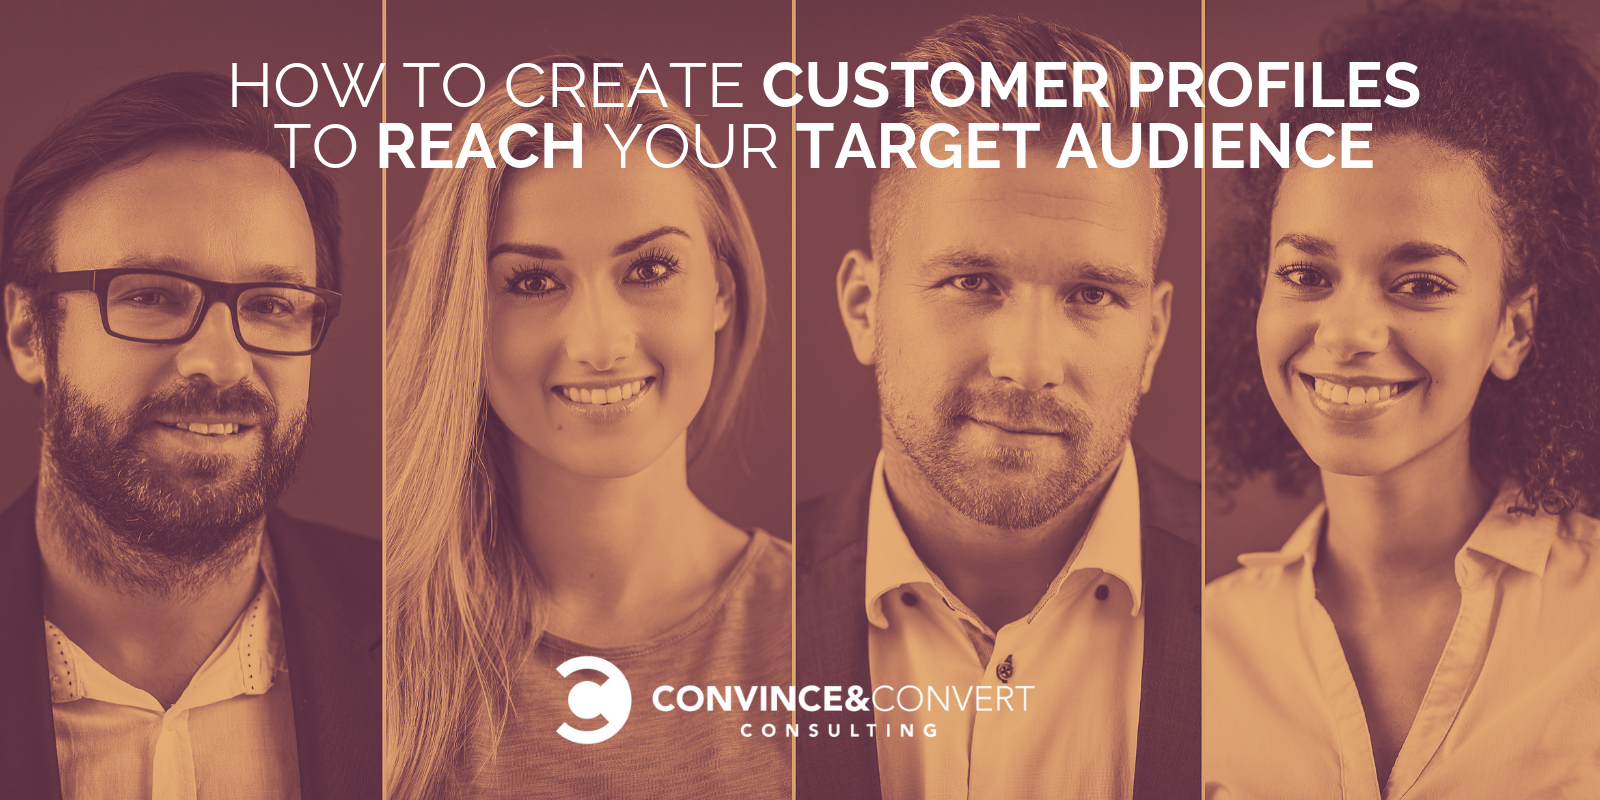 How to Create Customer Profiles to Reach Your Target Audience